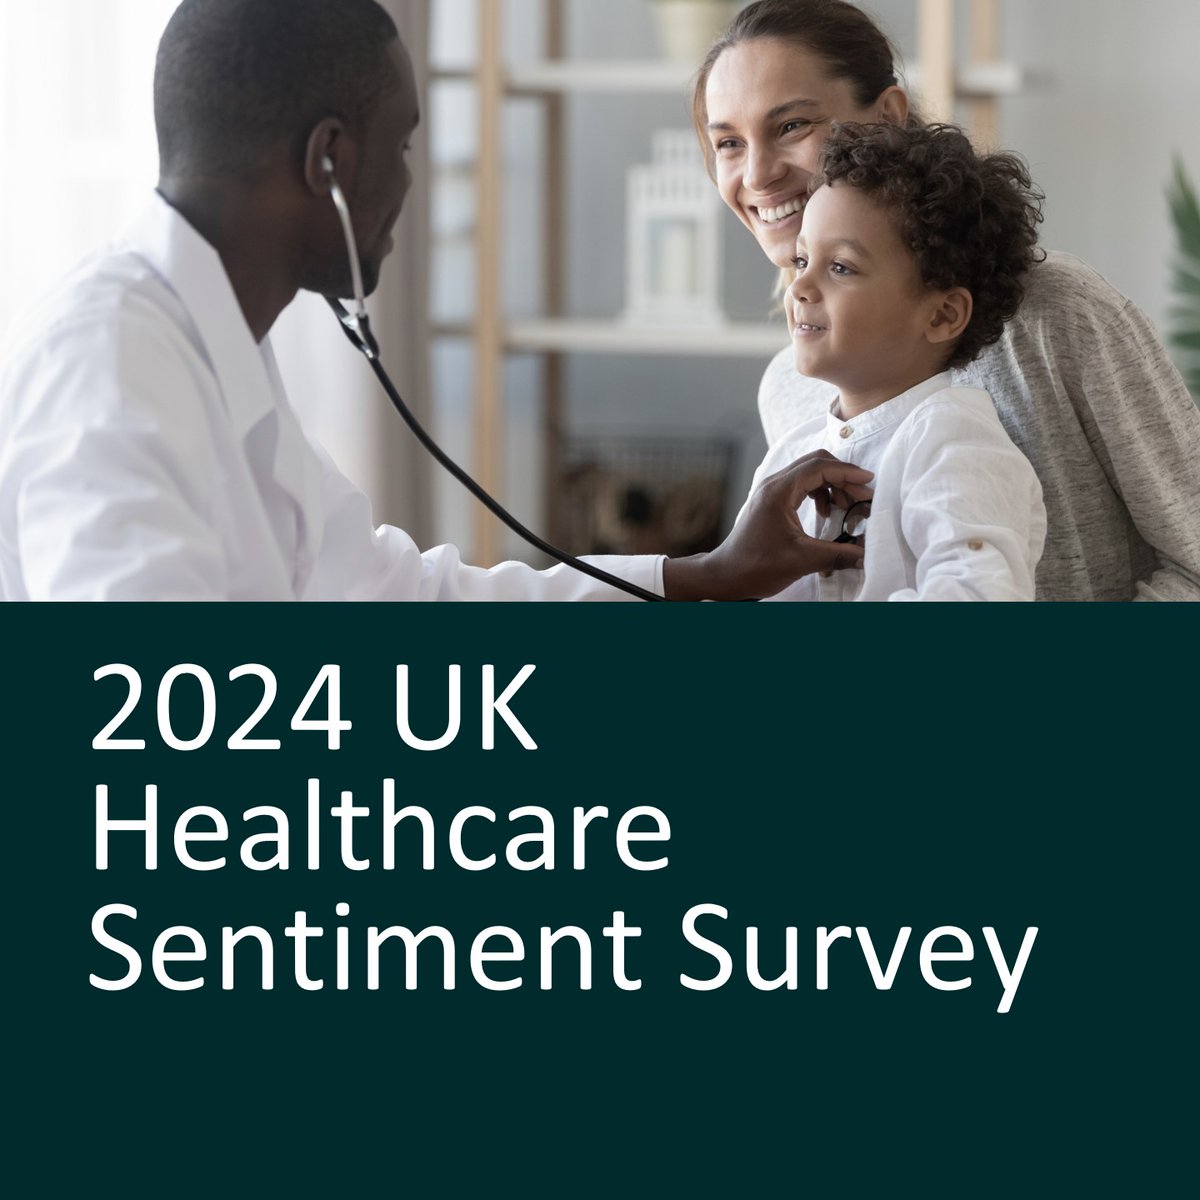 We surveyed over 200 #healthcare investors, developers, and providers to understand demand, growth strategies, operational performance, and the outlook for investment and development activity. Read our 2024 UK Healthcare Sentiment Survey: cbre.co/44E2uKB #Investment